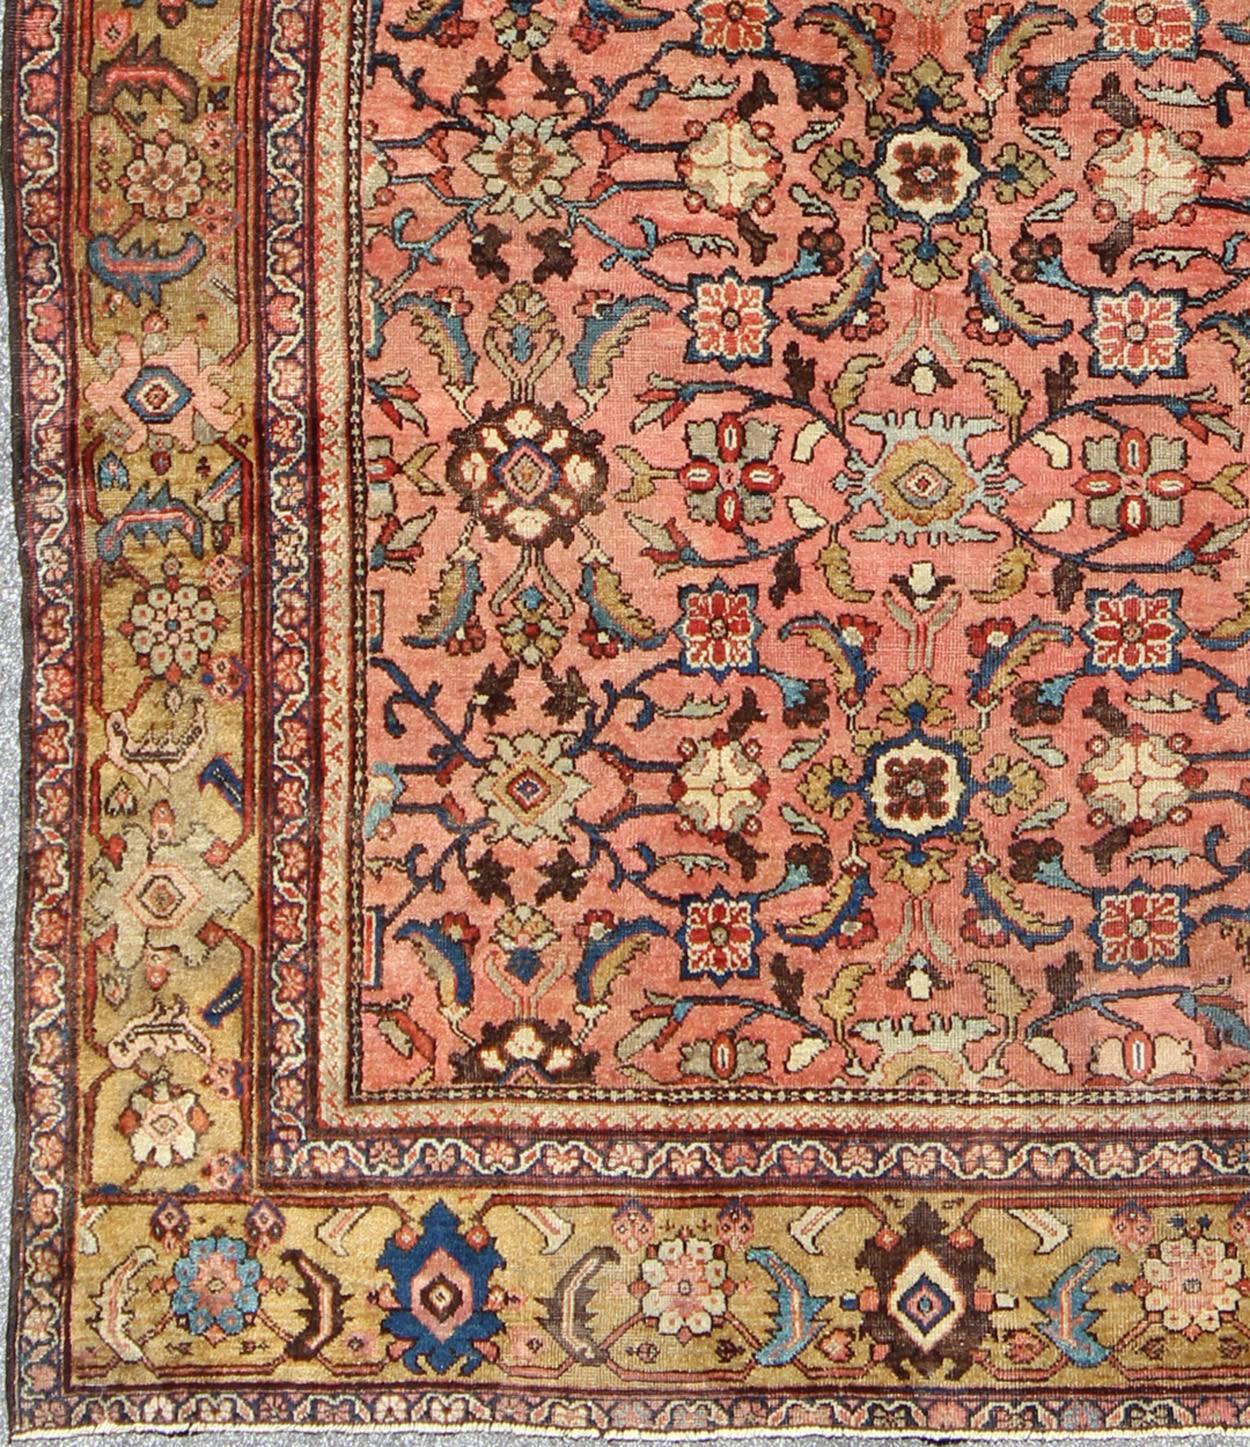 This inspiring, turn-of-the-century Sultanabad draws heavily from nature for its harmonious design. A luxurious field of salmon contains a meticulous array of interconnected floral motifs in various shades of browns, greens, gold, blues, reds, and